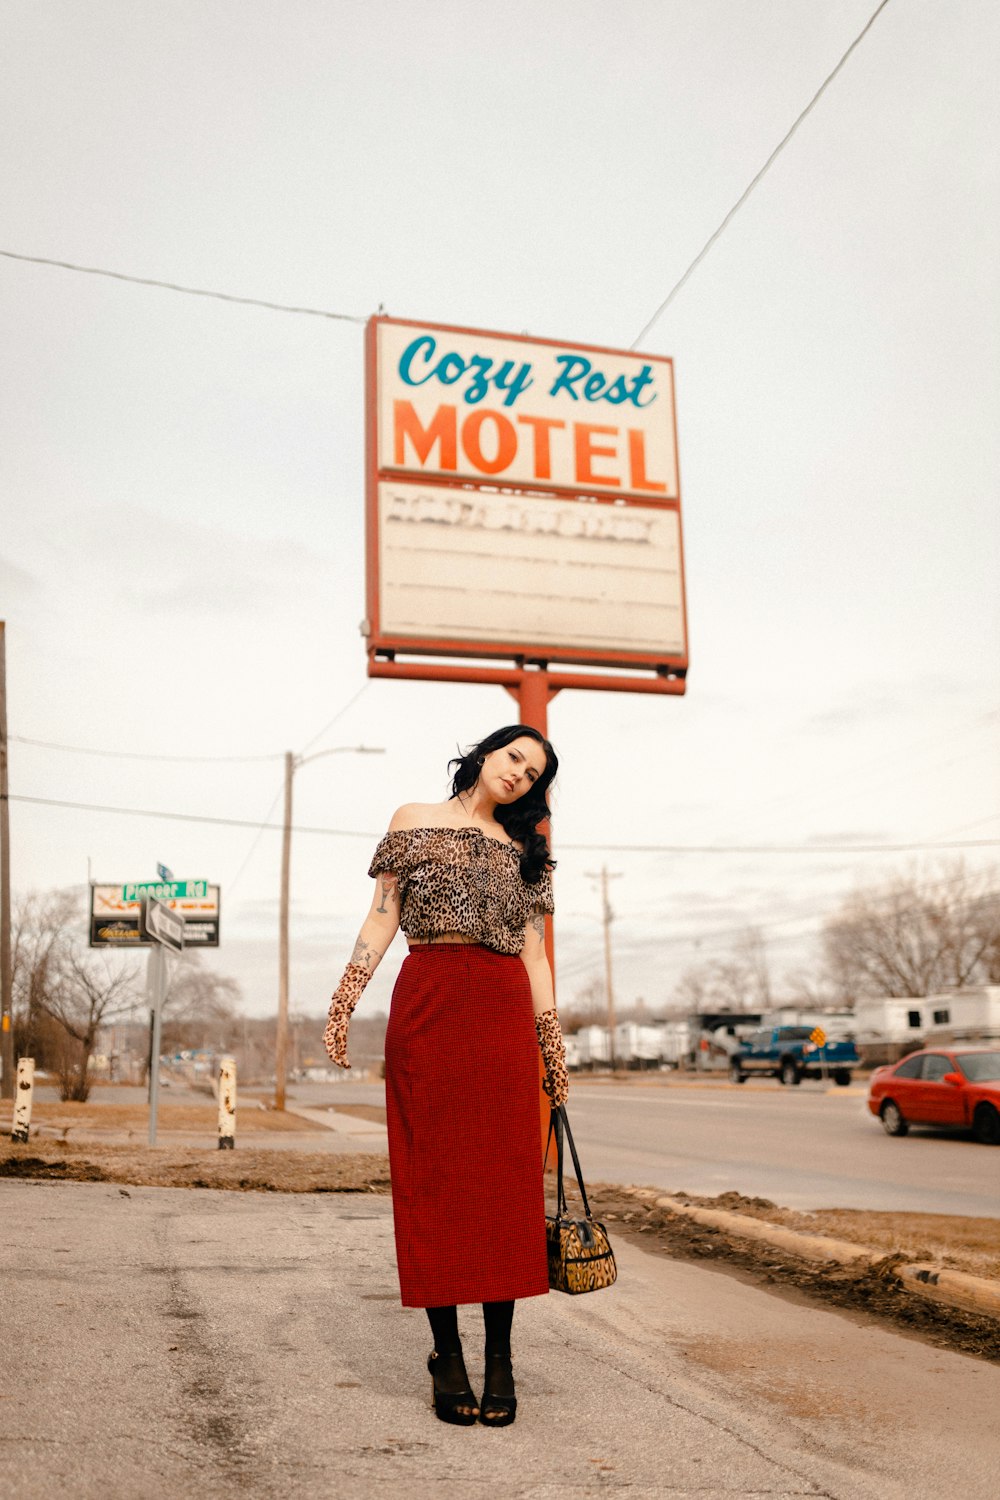 a woman in a red skirt holding up a motel sign